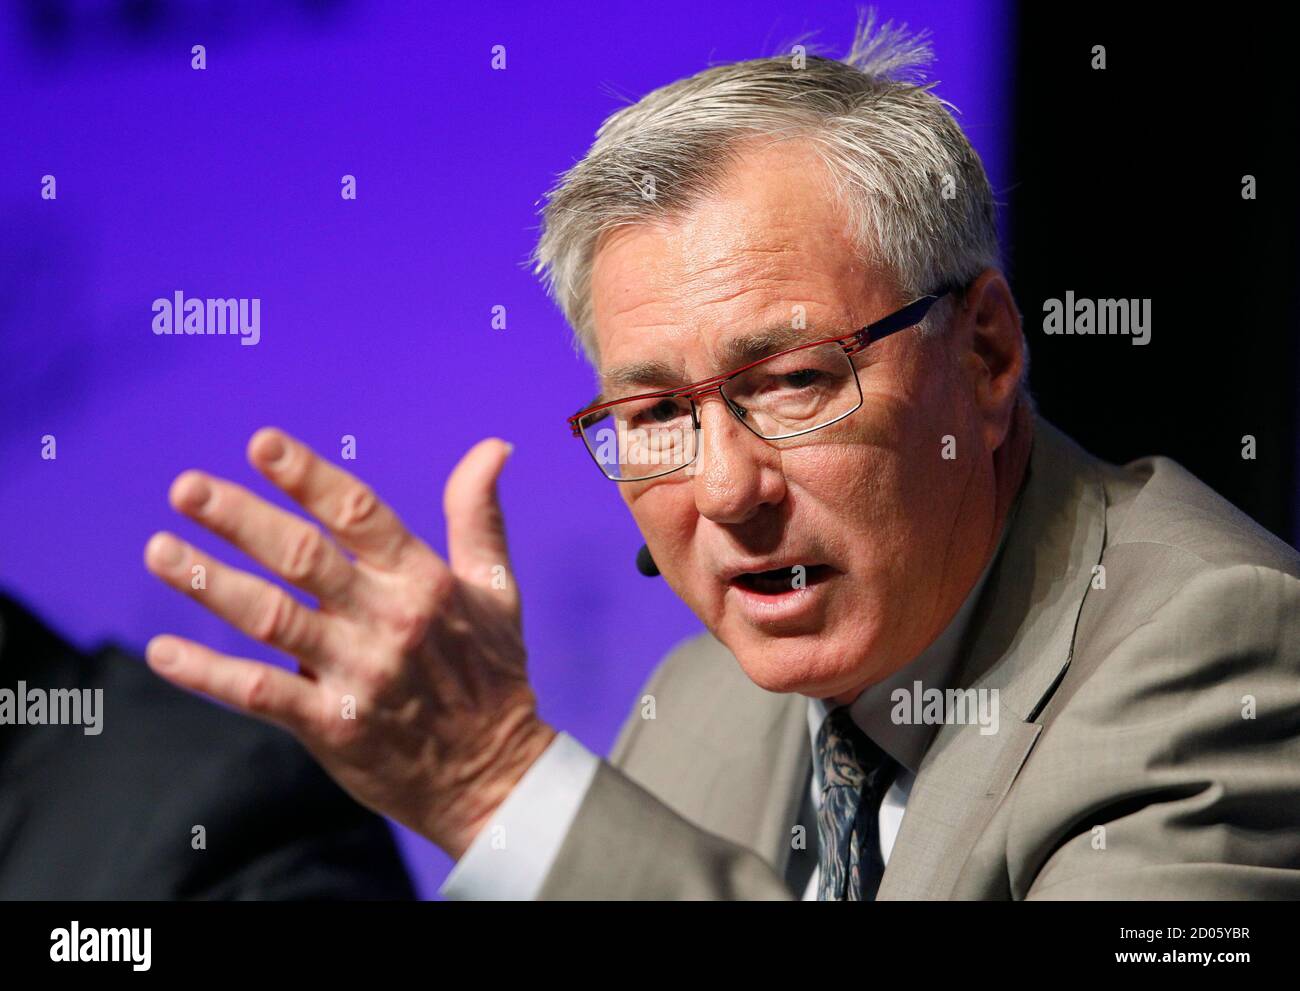 Eric Sprott, chief investment officer and senior portfolio manager for Sprott Asset Management, participates in a panel discussion during the Skybridge Alternatives (SALT) Conference in Las Vegas, Nevada May 9, 2012. SALT brings together public policy officials, capital allocators, and hedge fund managers to discuss financial markets. REUTERS/Steve Marcus (UNITED STATES - Tags: BUSINESS) Stock Photo